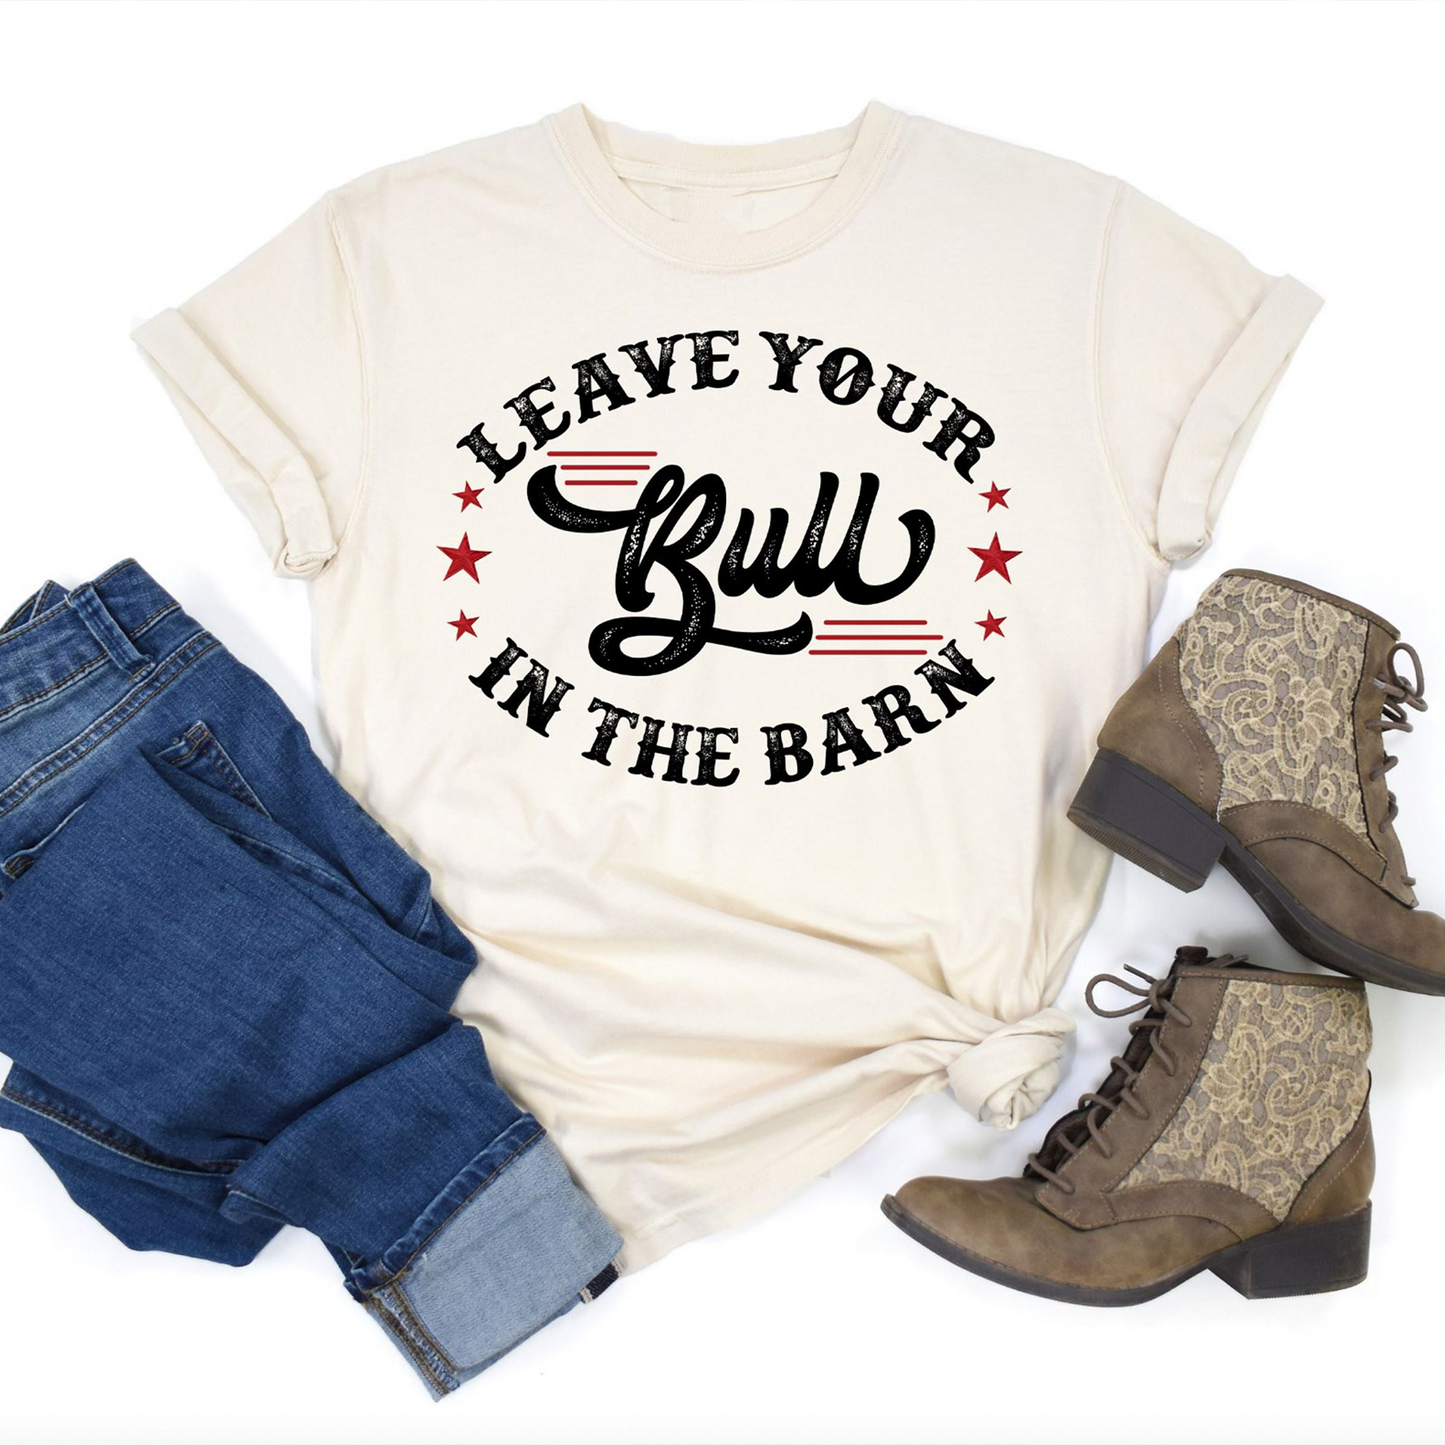 Leave Your Bull in the Barn T-Shirt